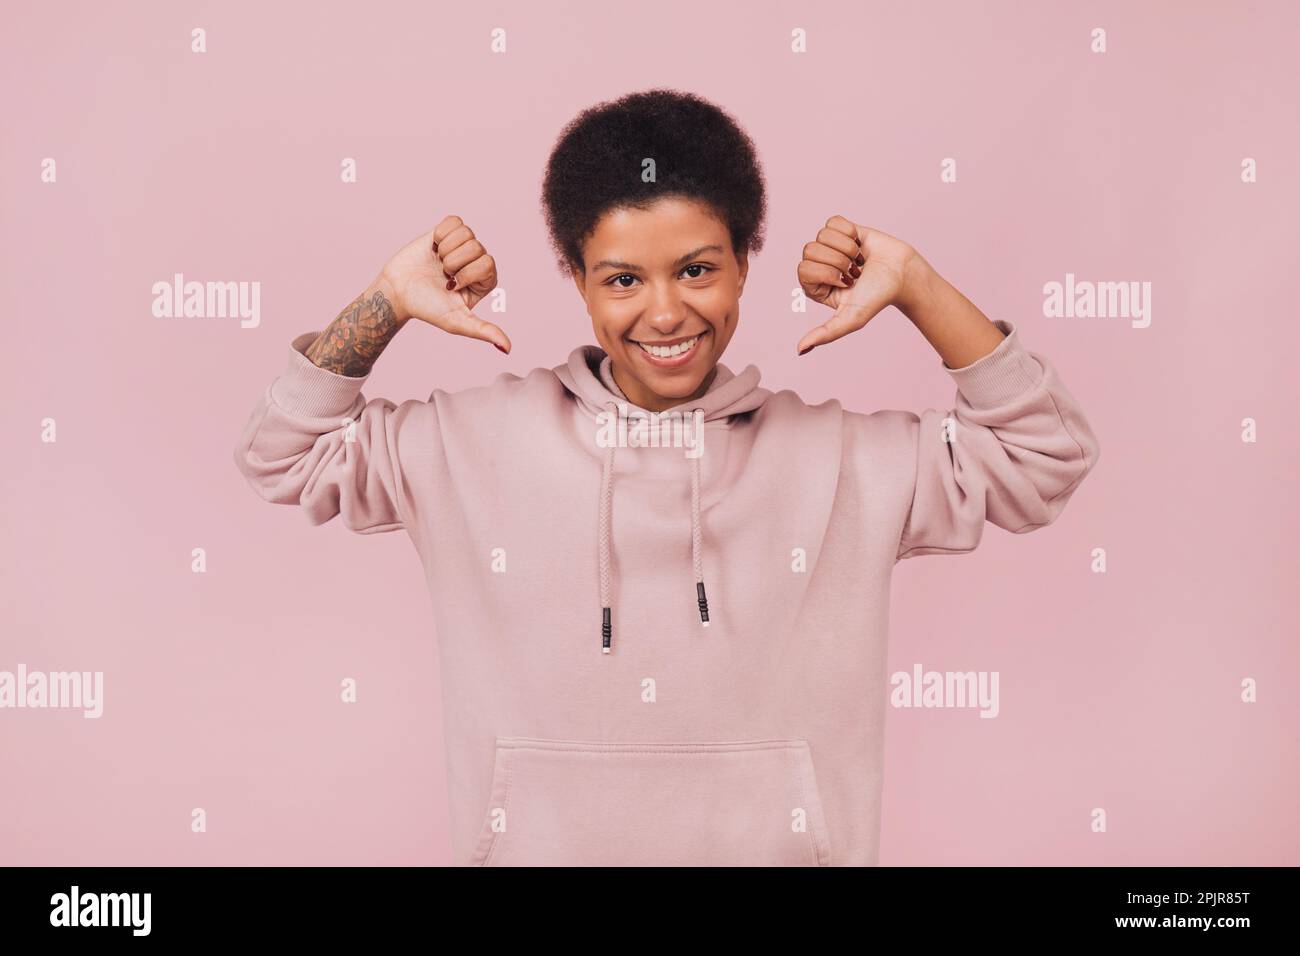 Joyful black girl raising her hands up and showing on herself. Cute smiling young woman wearing casual clothes posing on pink backdrop Stock Photo